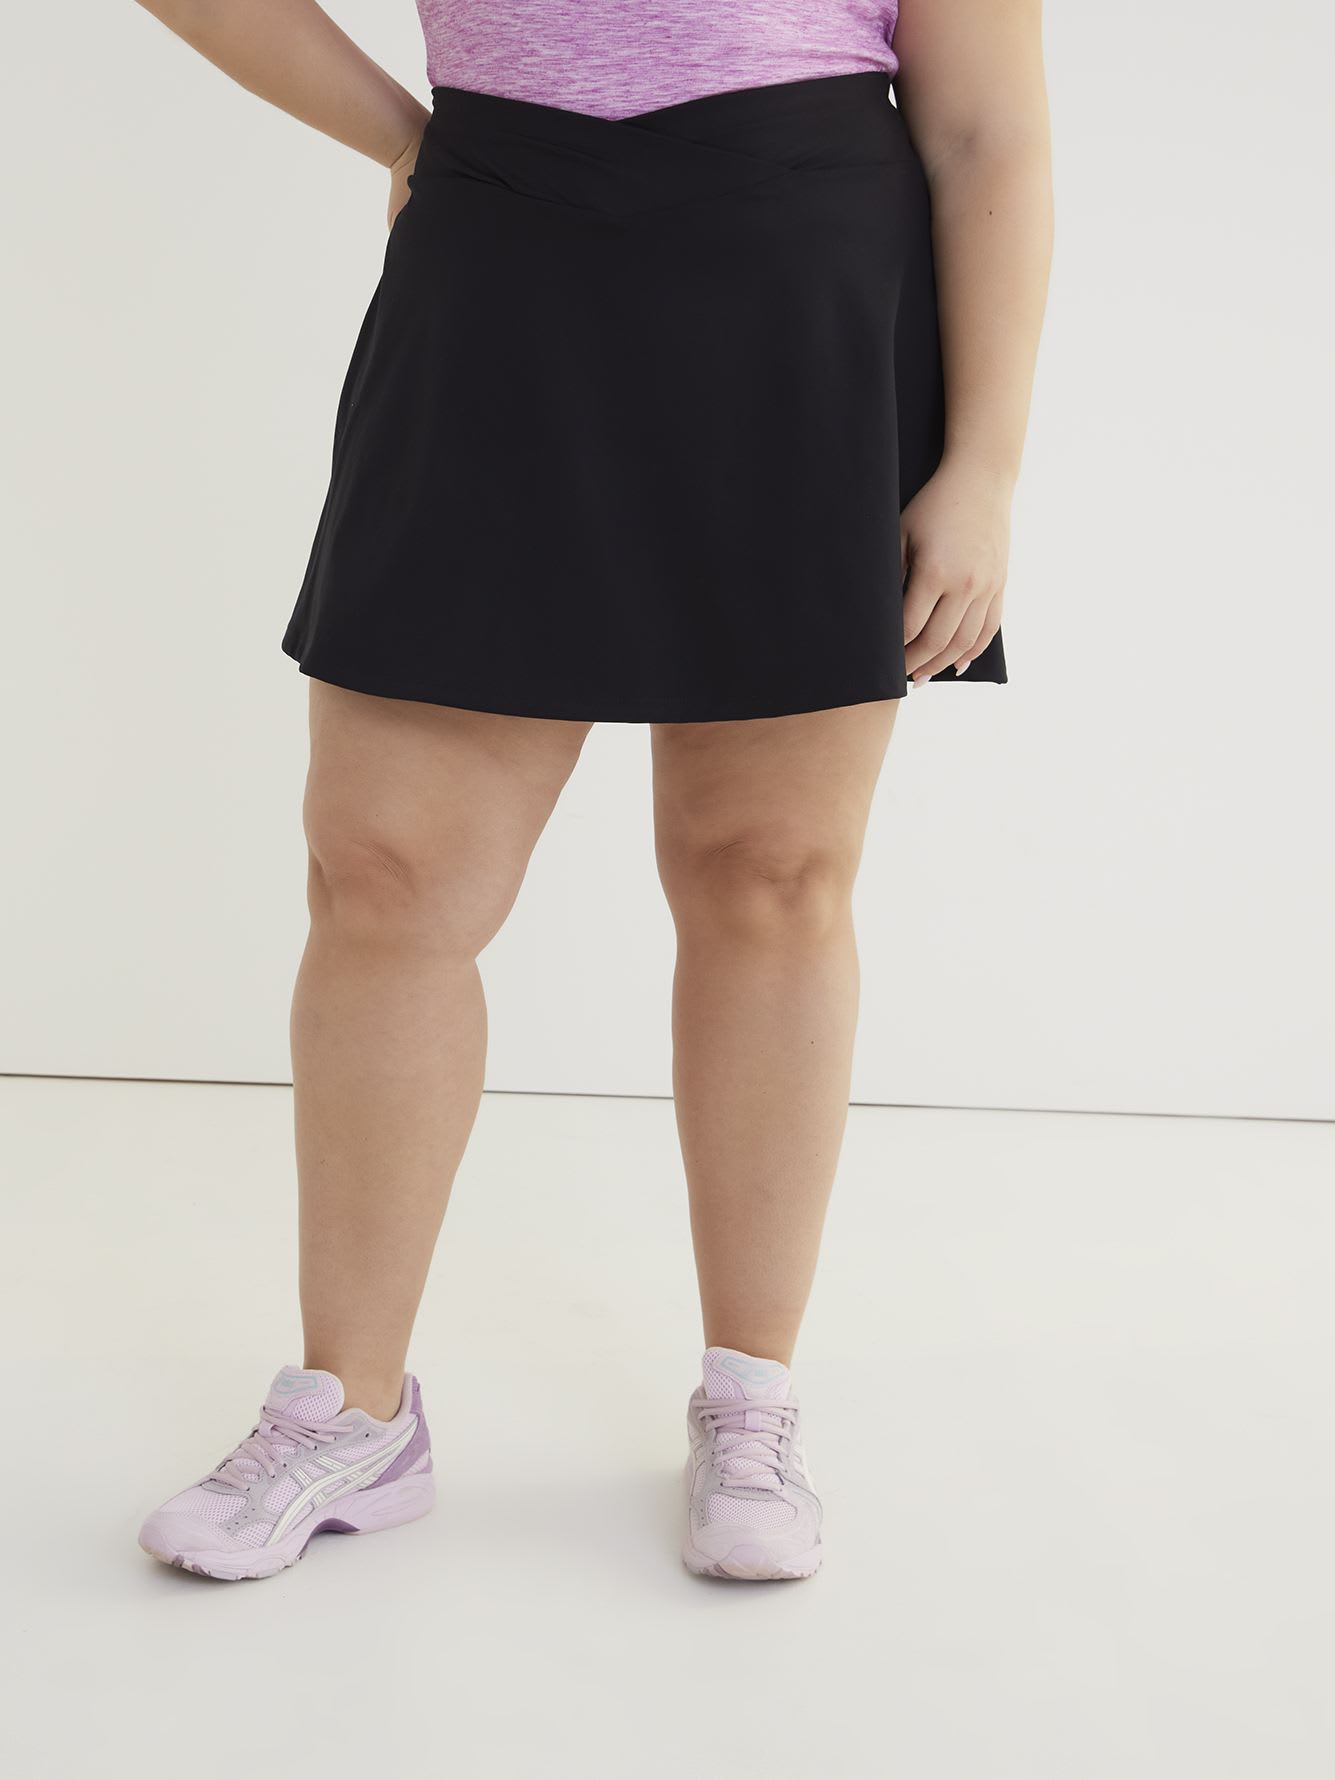 Responsible, Black Knit Skort with Crossover Waistband - Active Zone